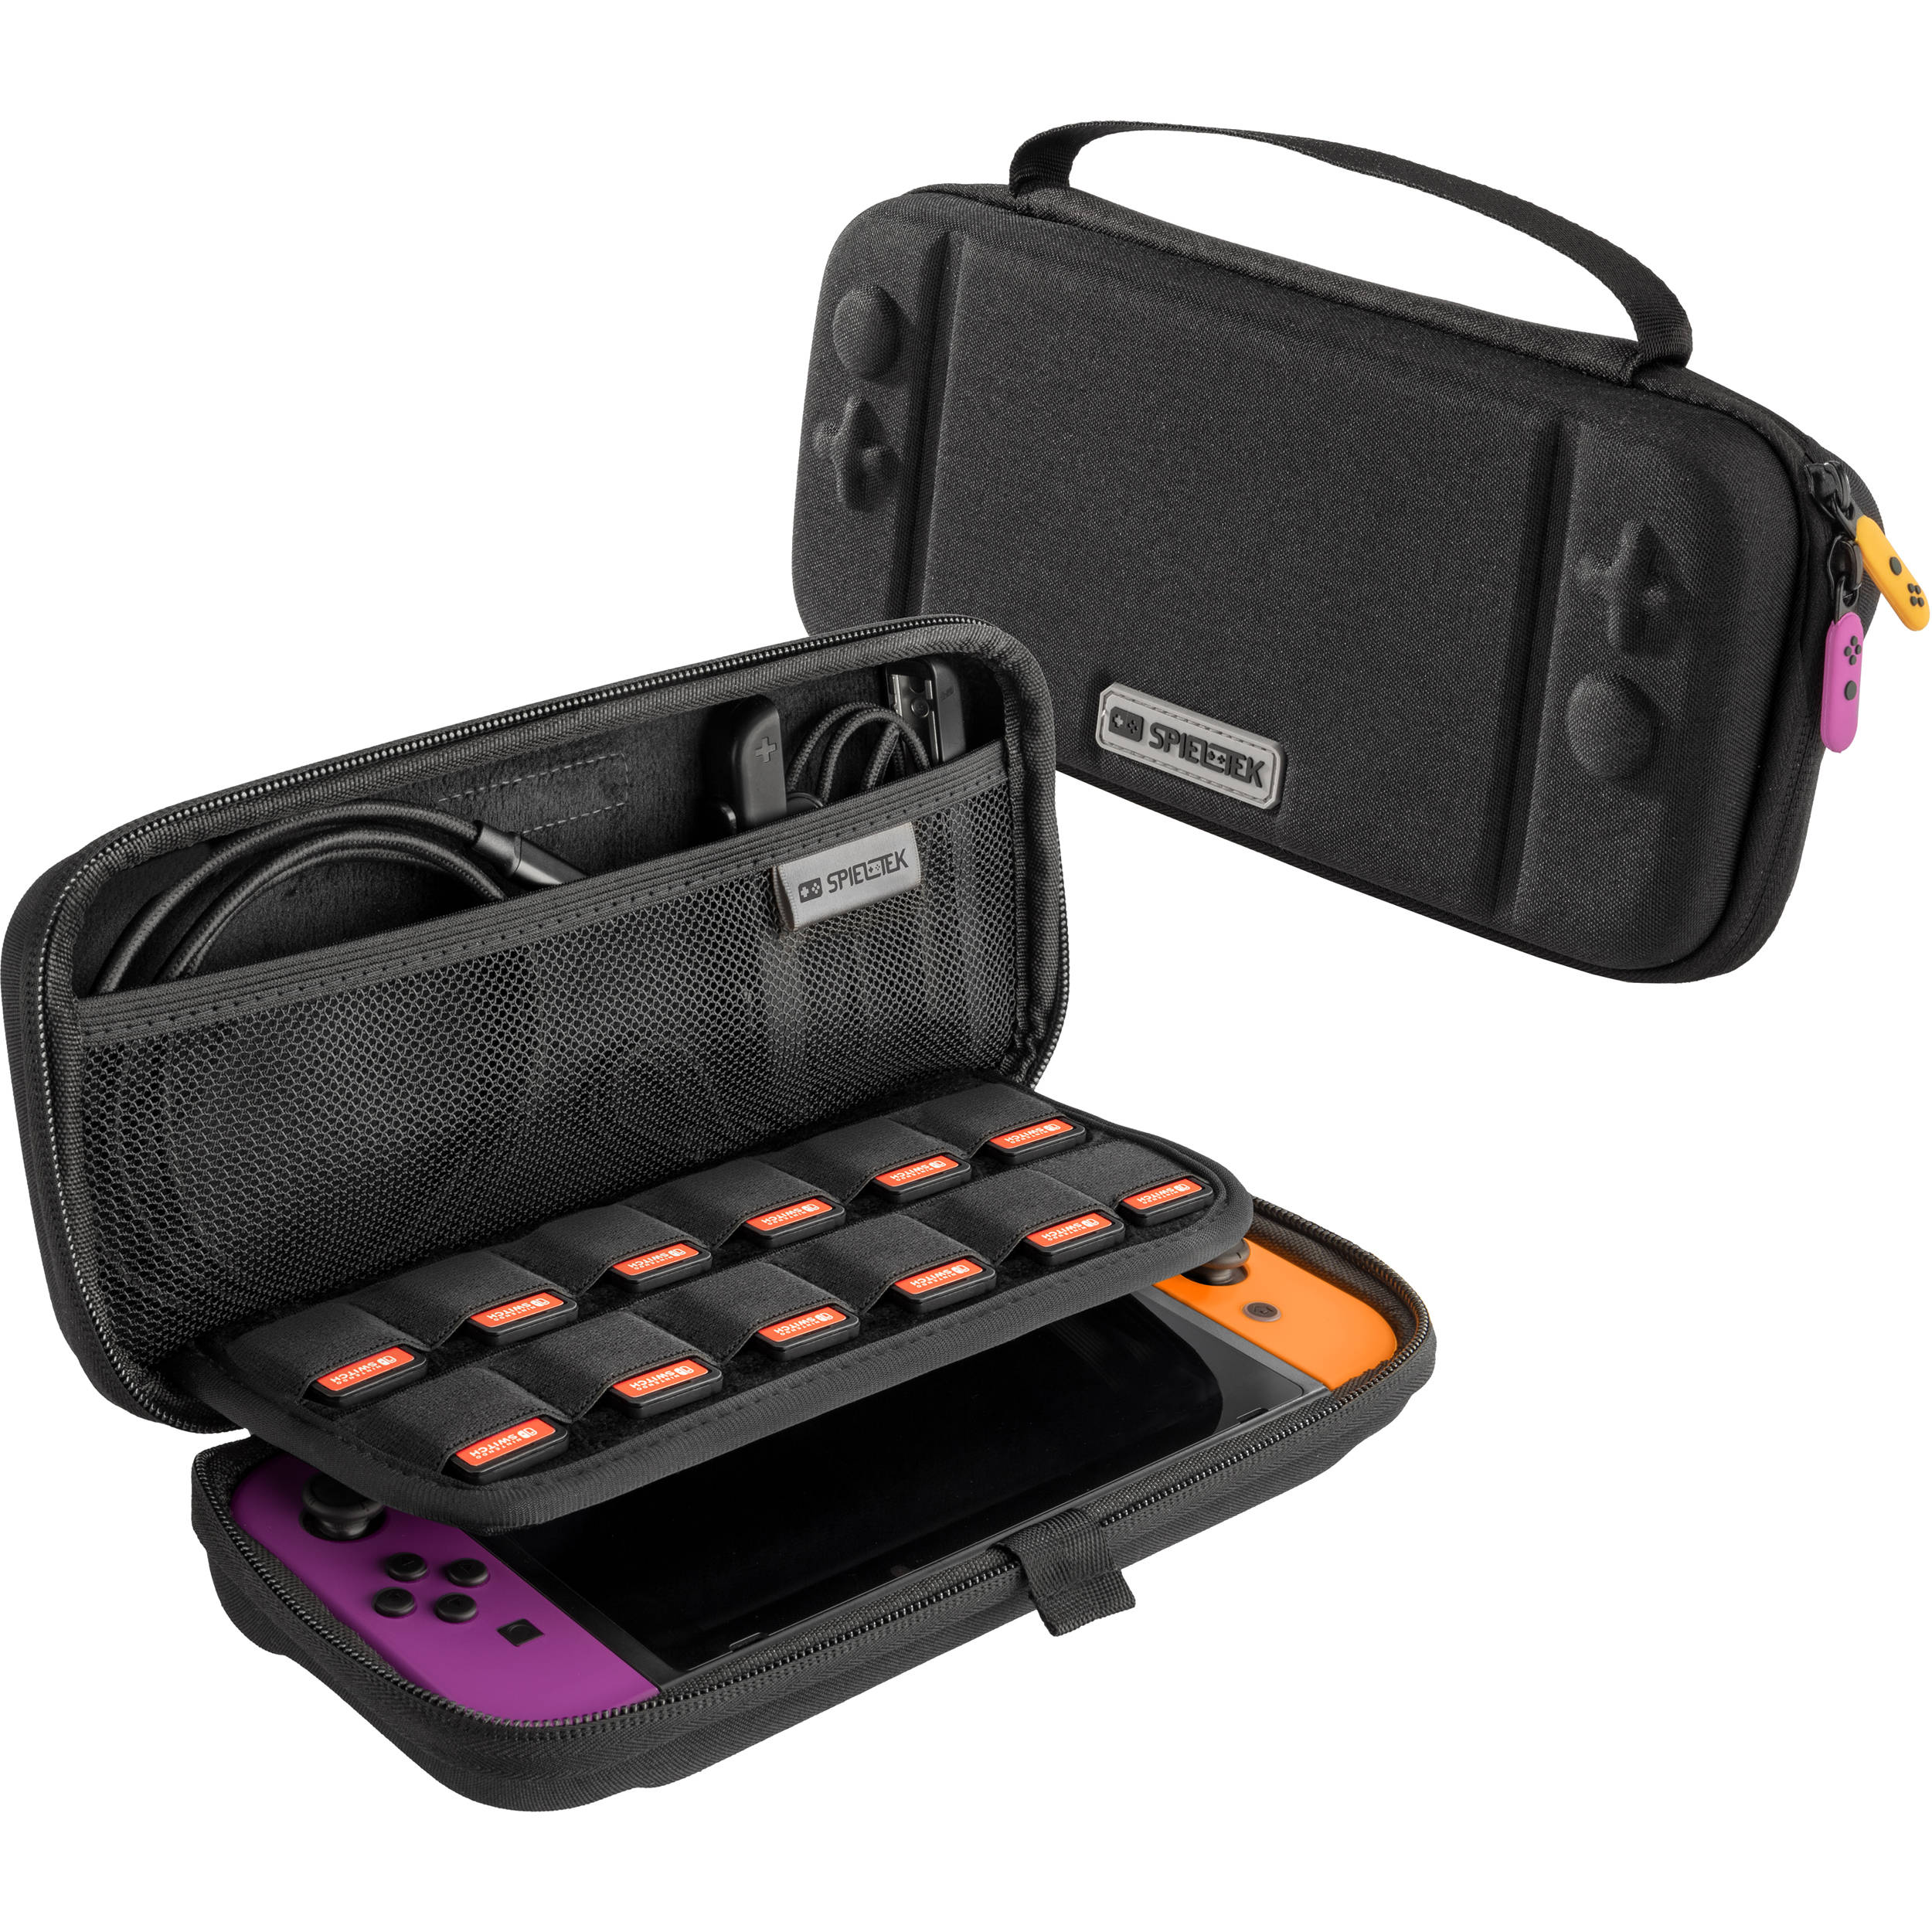 nintendo switch carrying case black friday